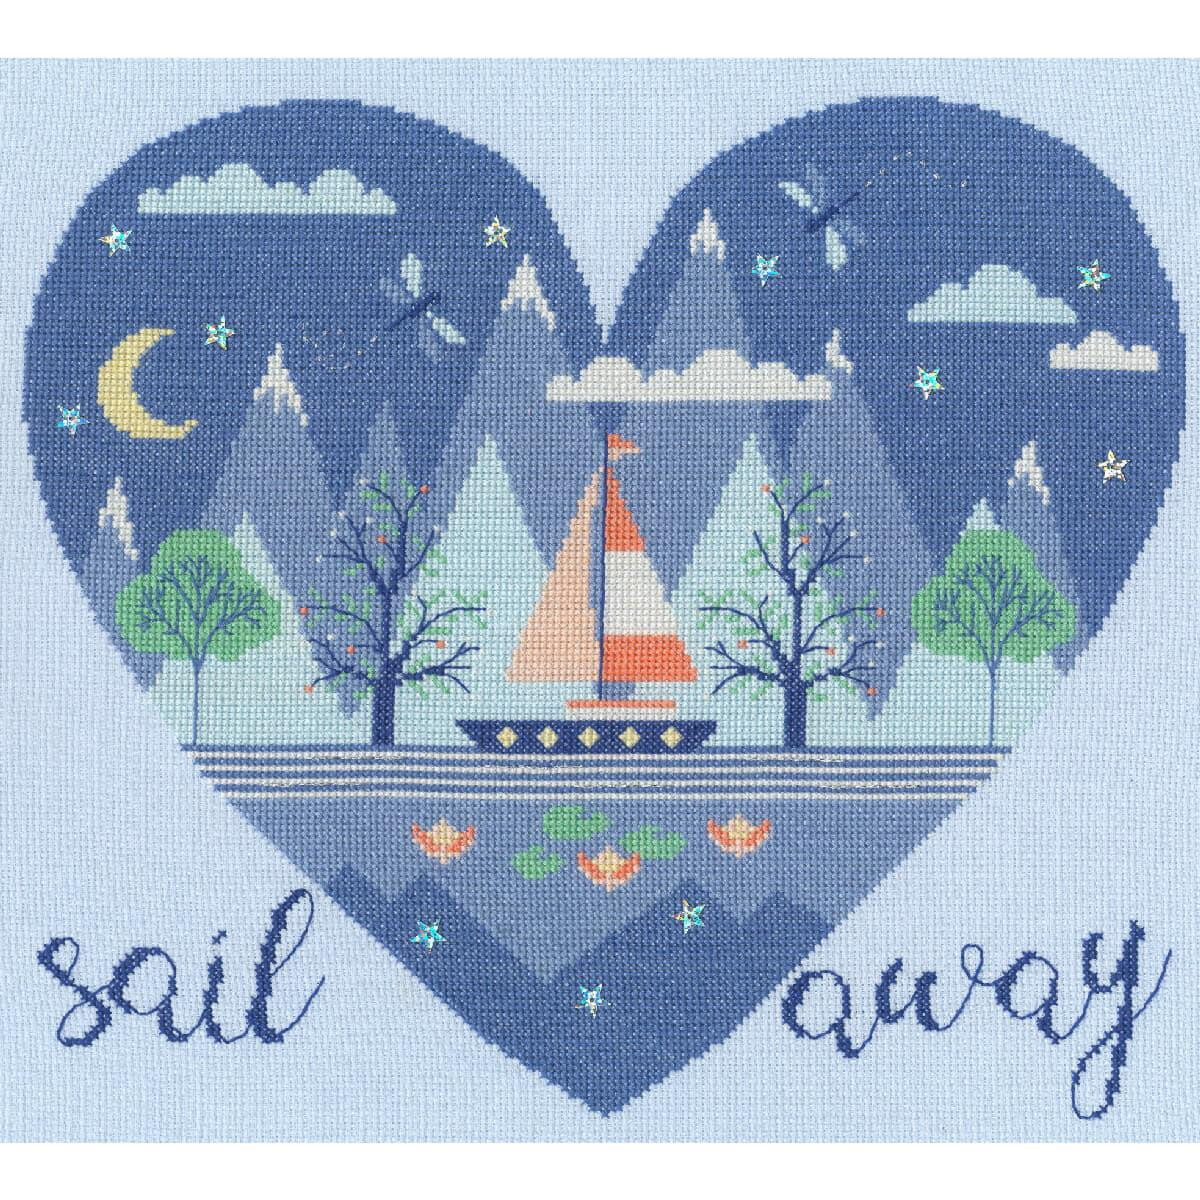 Bothy Threads counted cross stitch kit "Sail...